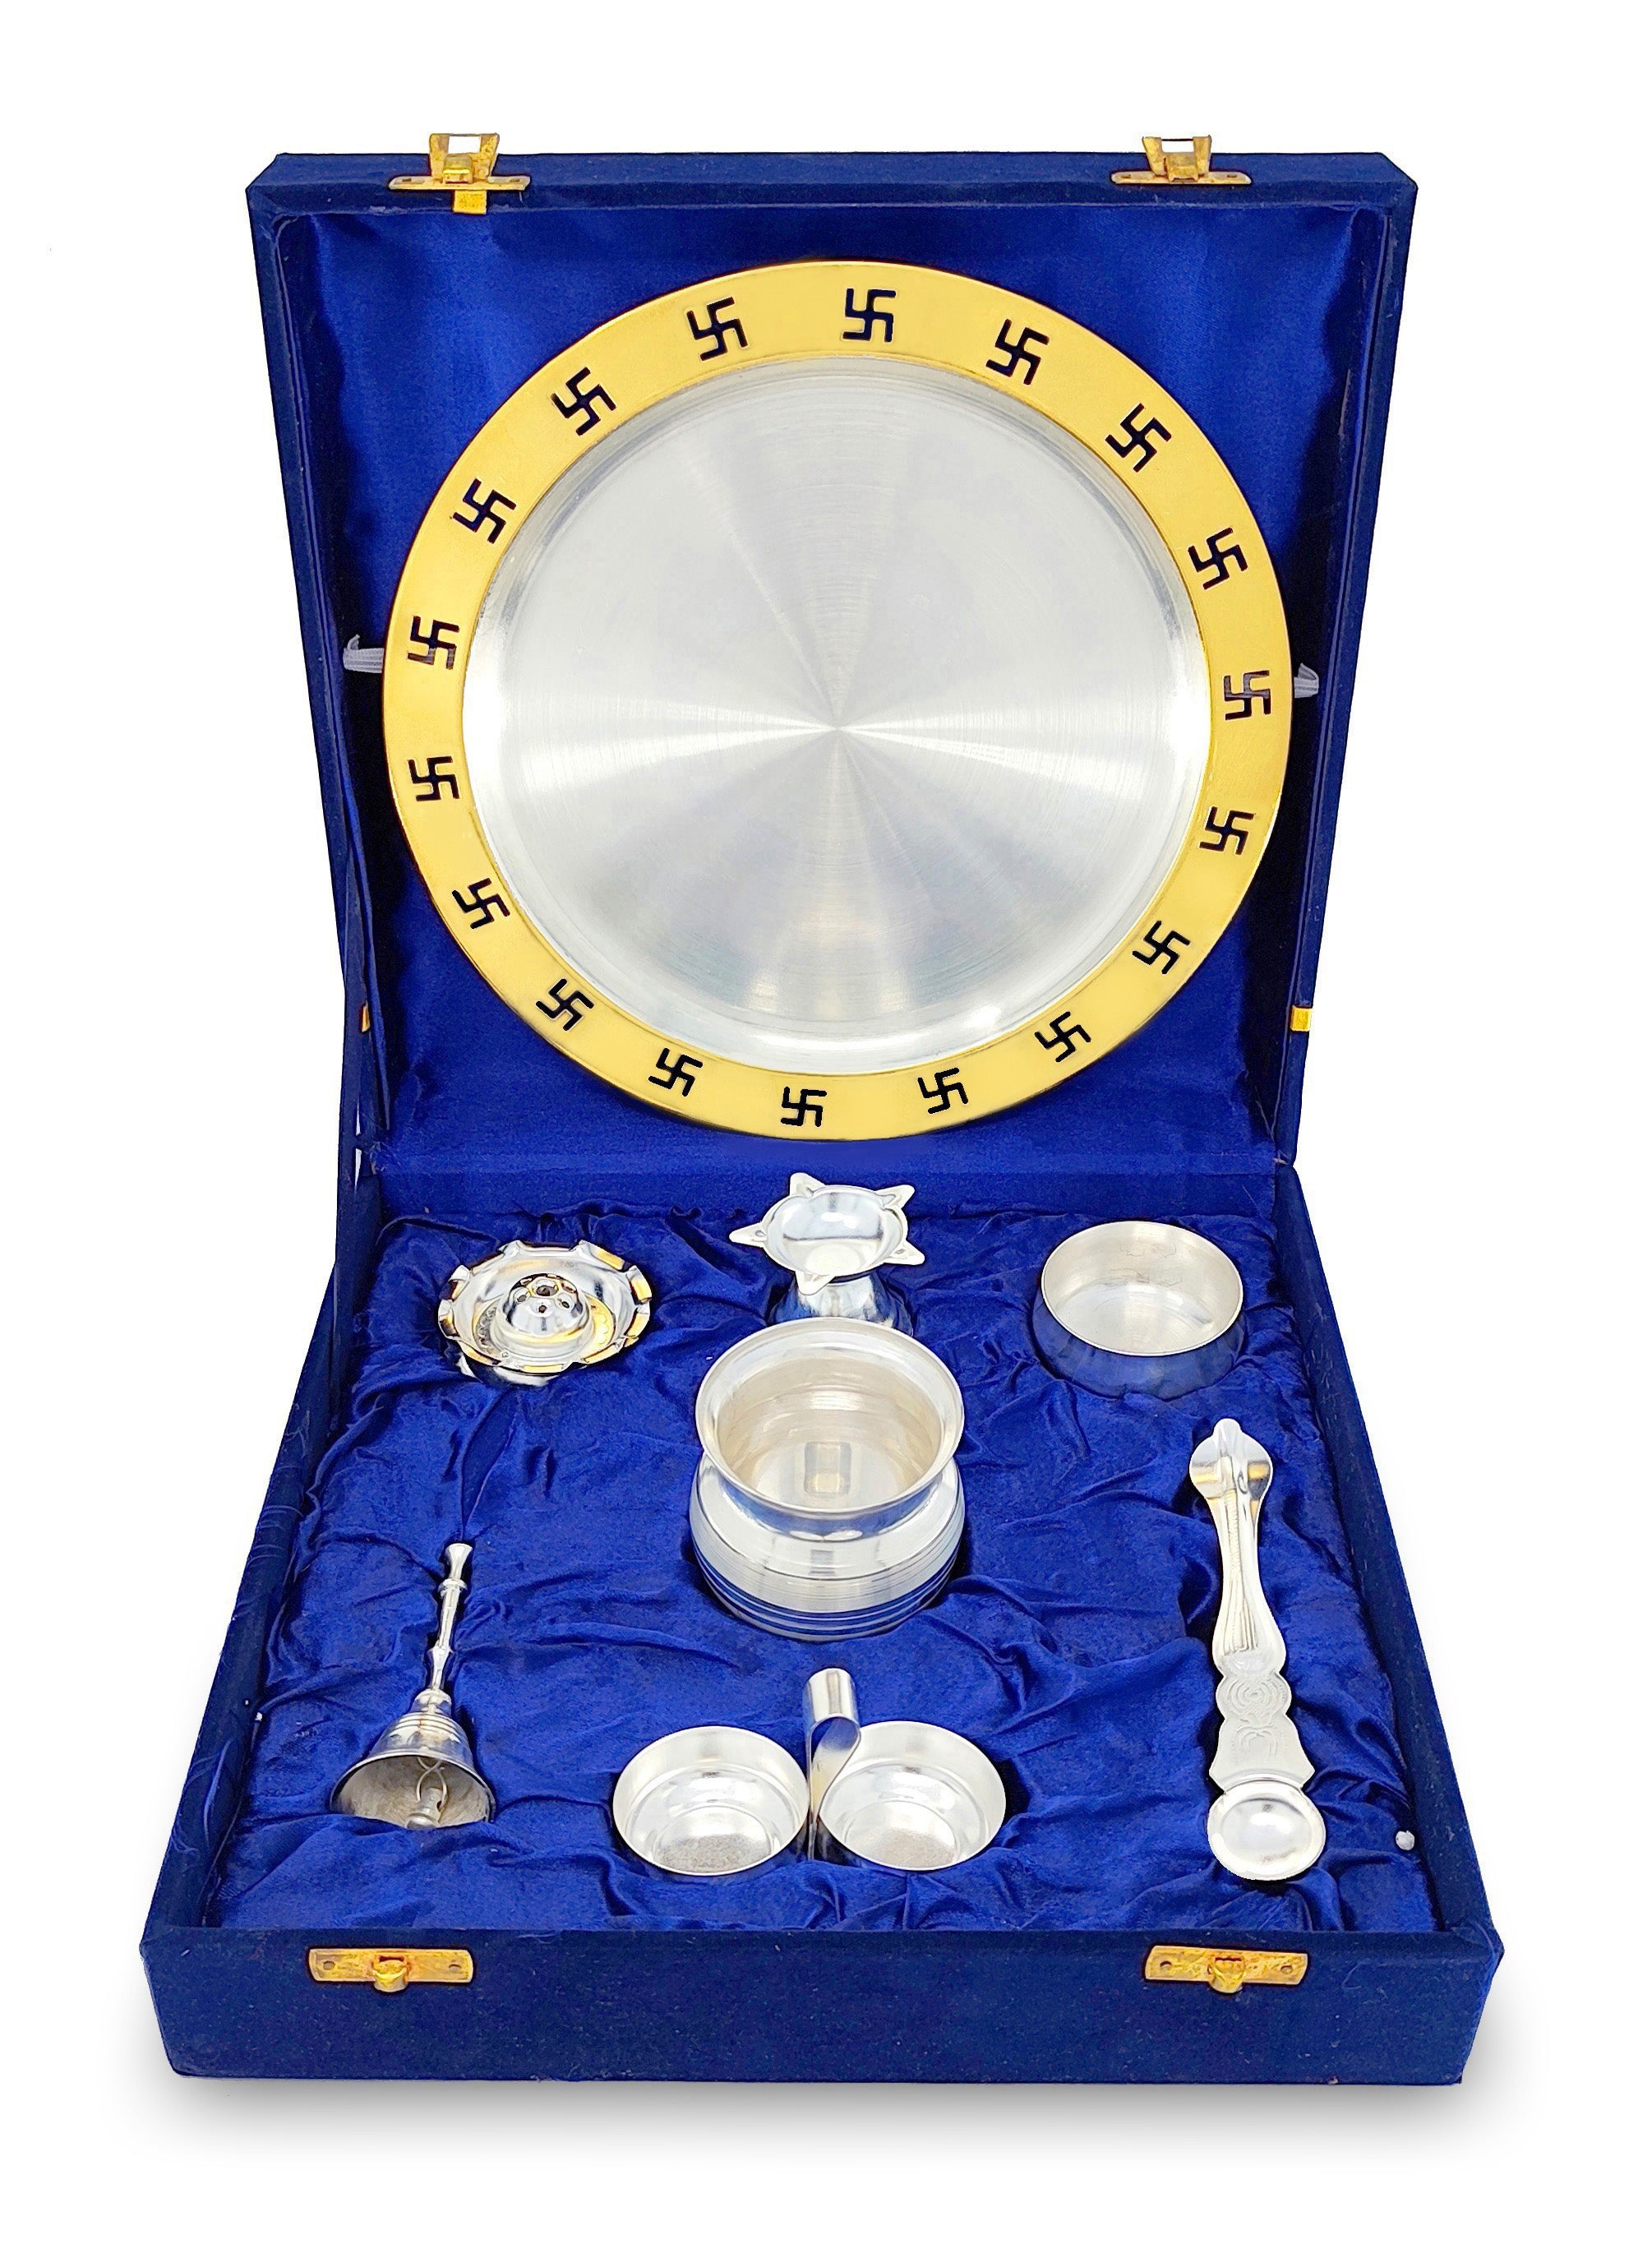 BENGALEN Pooja Thali Set Gold & Silver Plated with Blue Gift Box